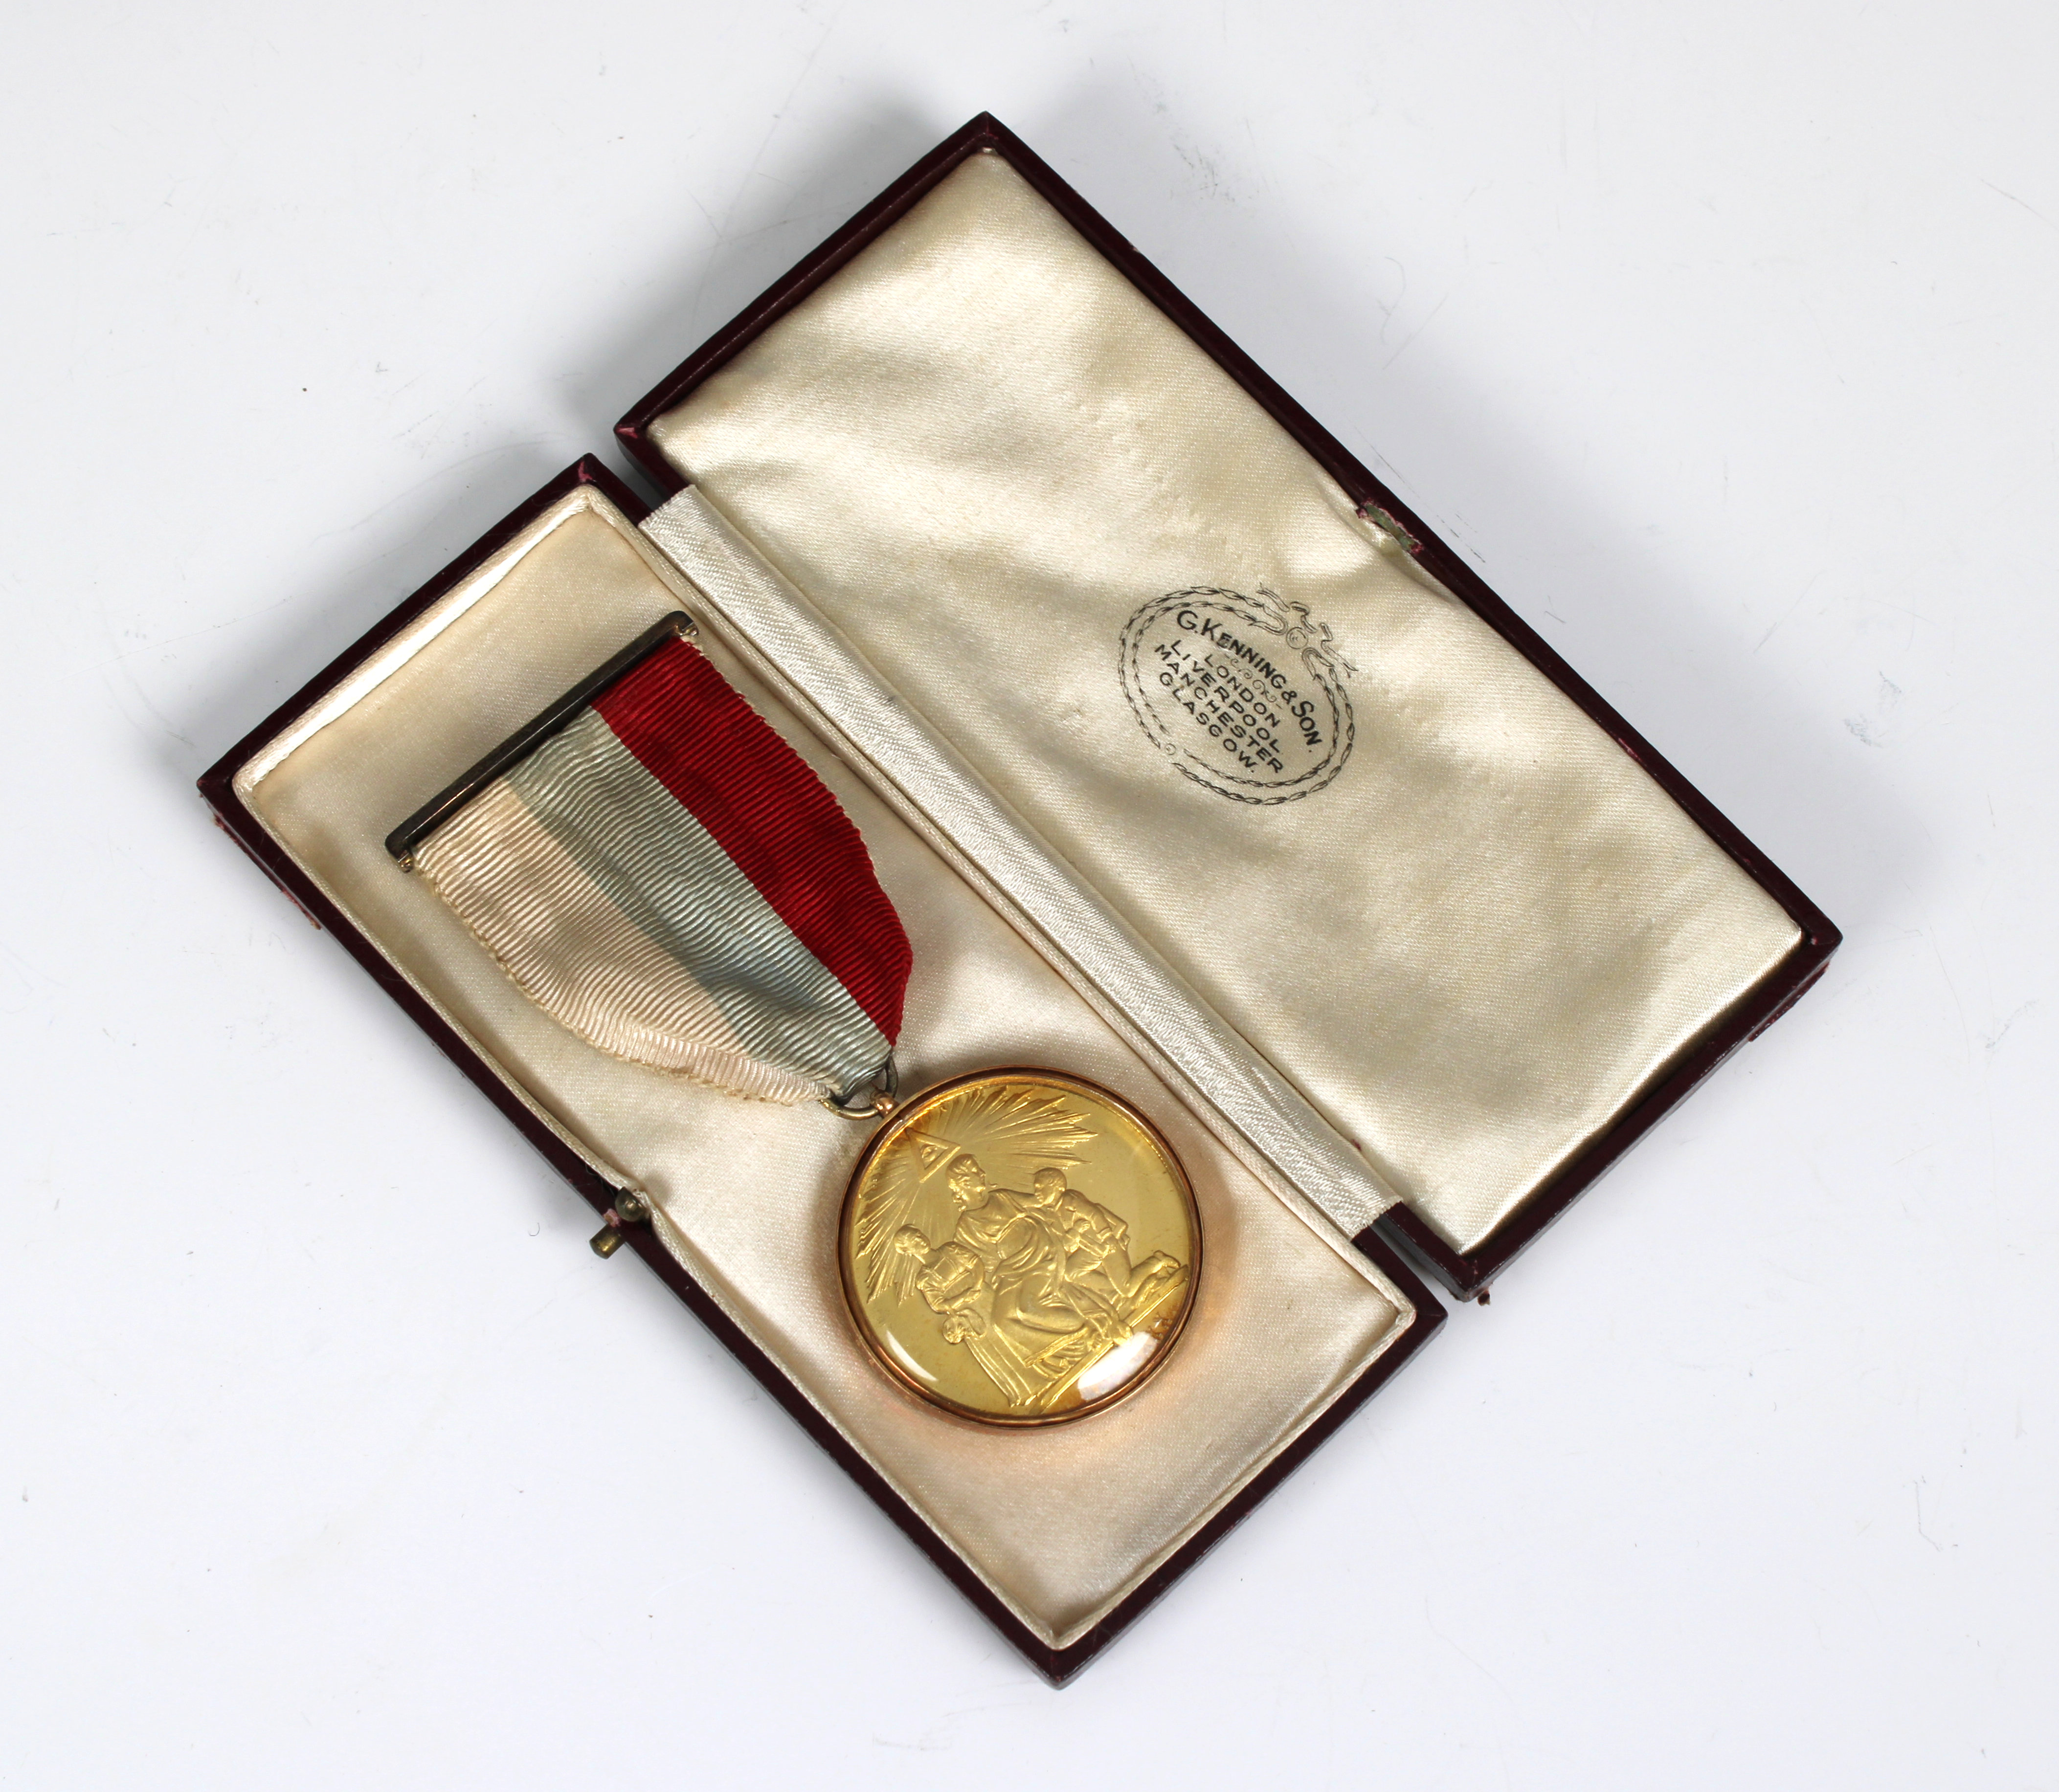 Gold mounted Charitable Masonic medal, dated 'MDCCCXXX', 1830 - Image 3 of 5